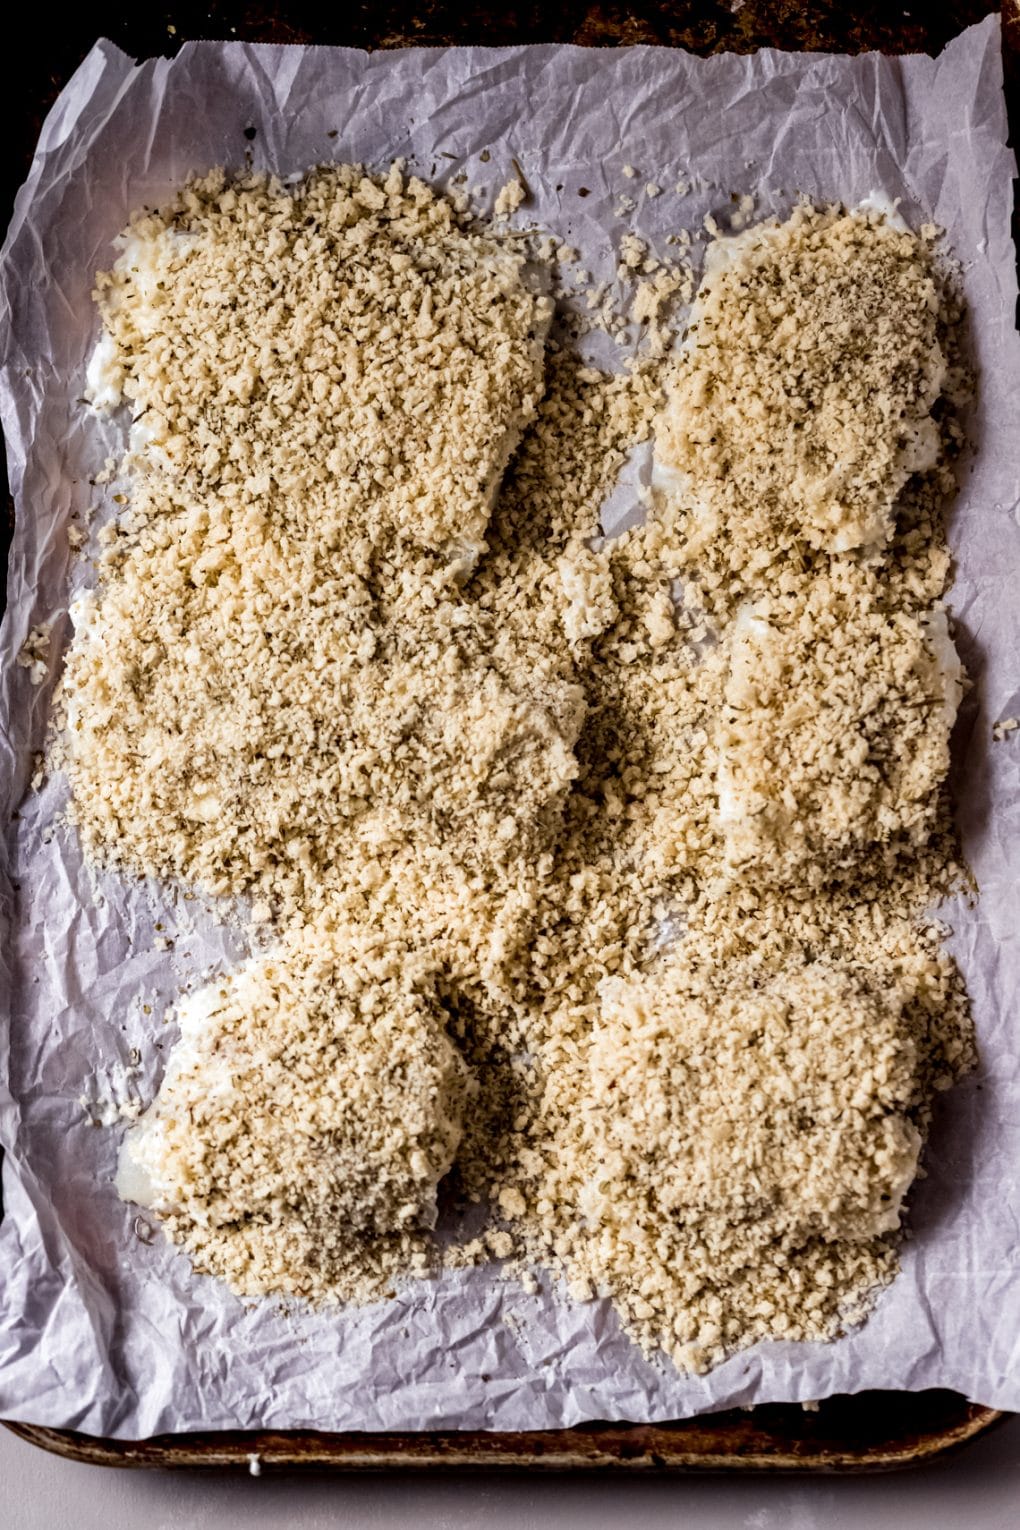 uncooked parmesan crusted cod on a sheet pan